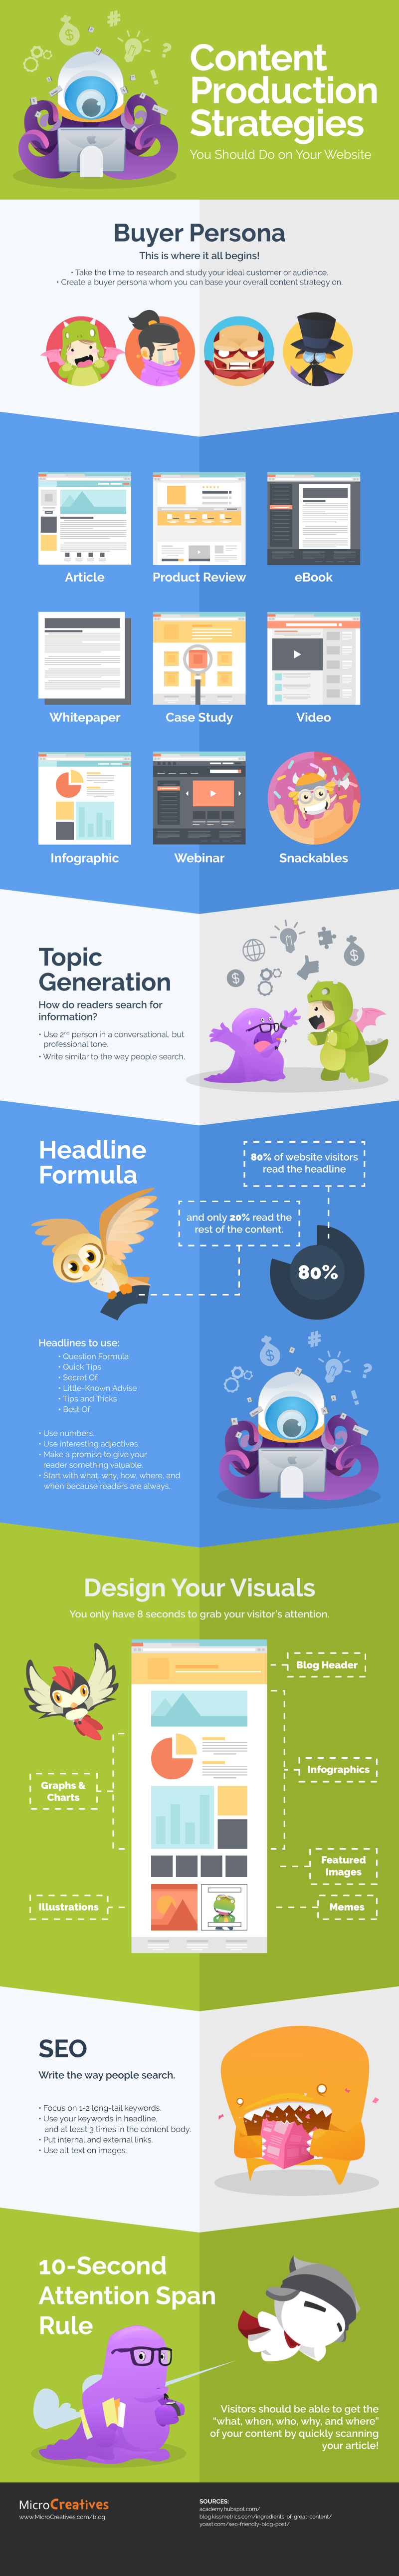 Content Production Strategies You Should Do On Your Website - #infographic